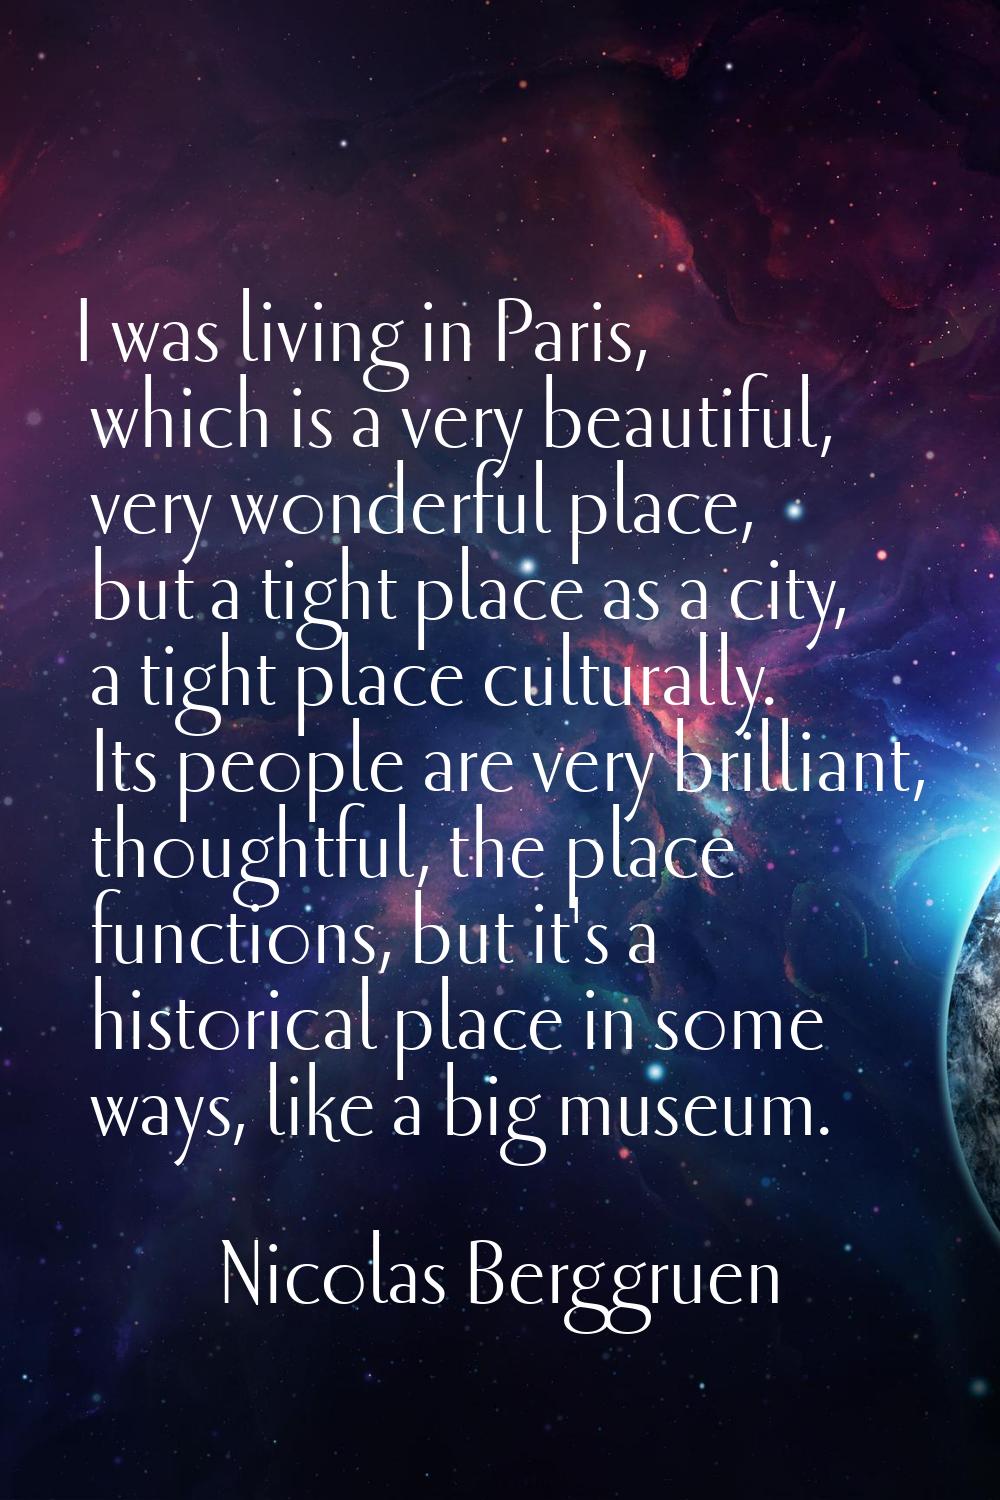 I was living in Paris, which is a very beautiful, very wonderful place, but a tight place as a city